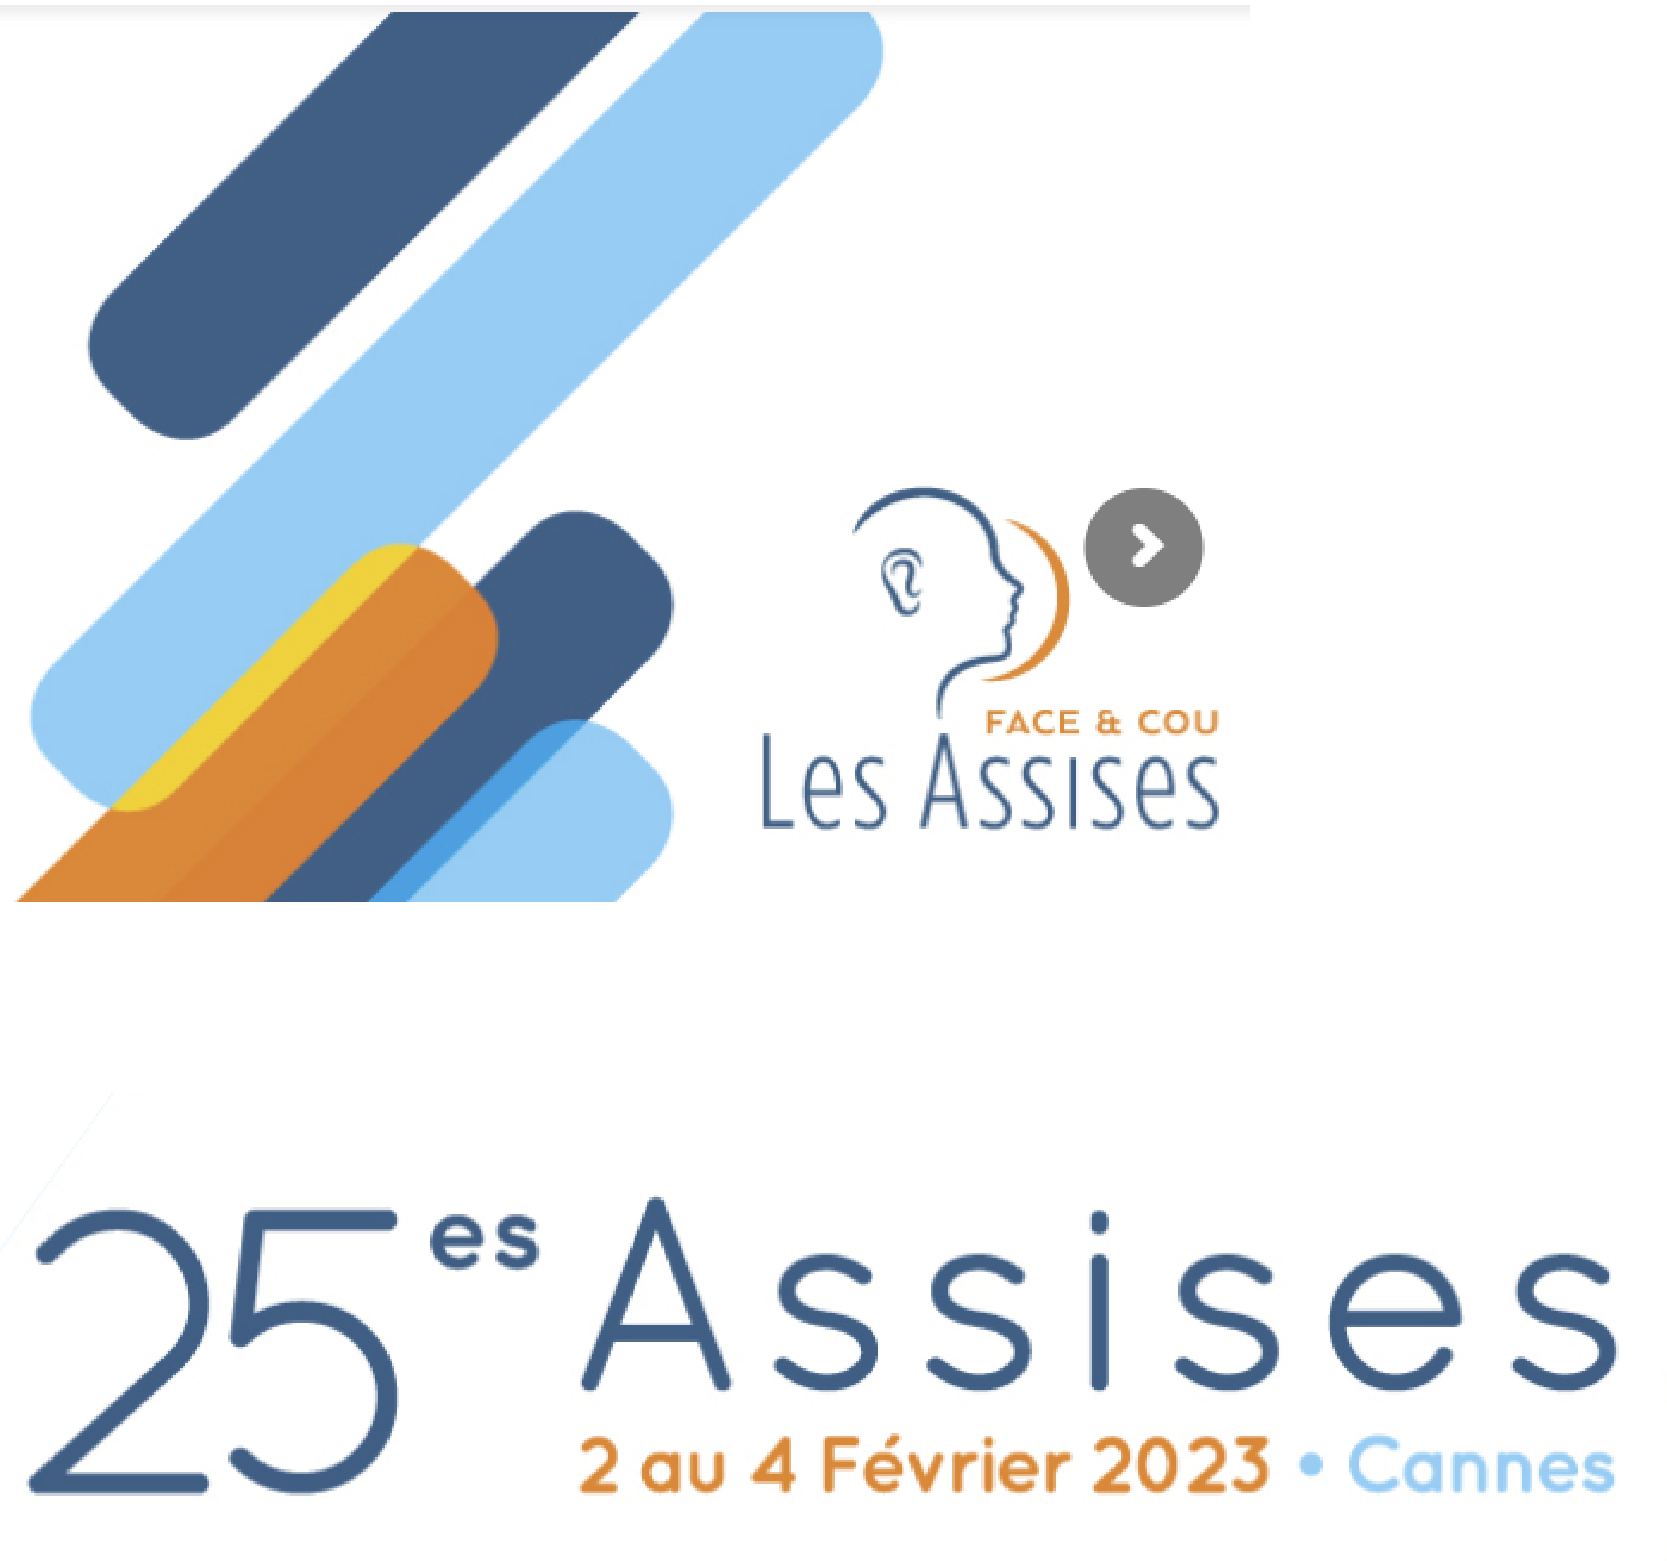 Assises Orthodontie & Chirurgie Orthognathique - AOCO 2023